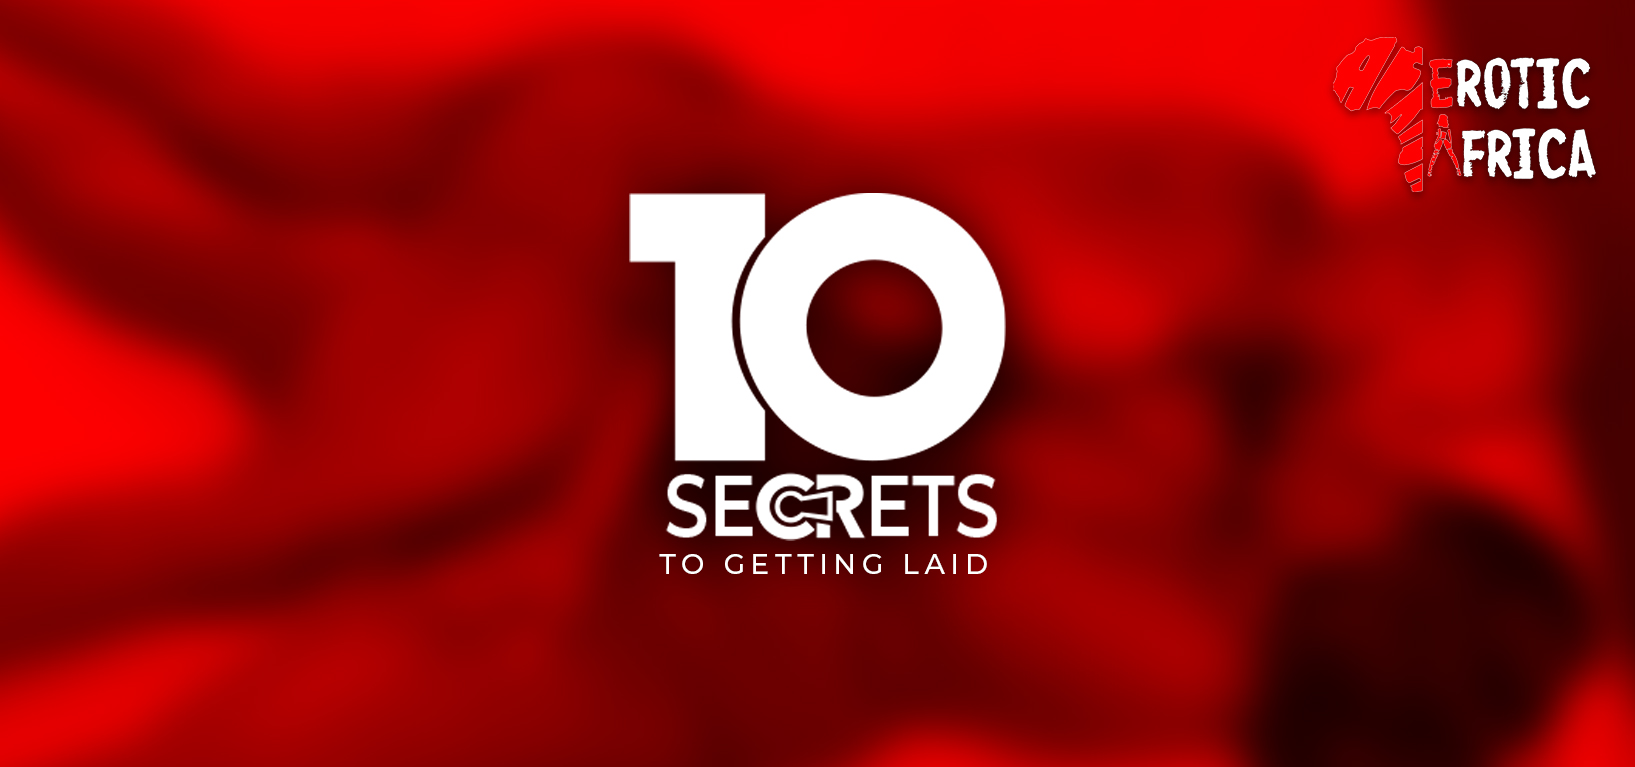 10 Secrets to getting laid on the first date